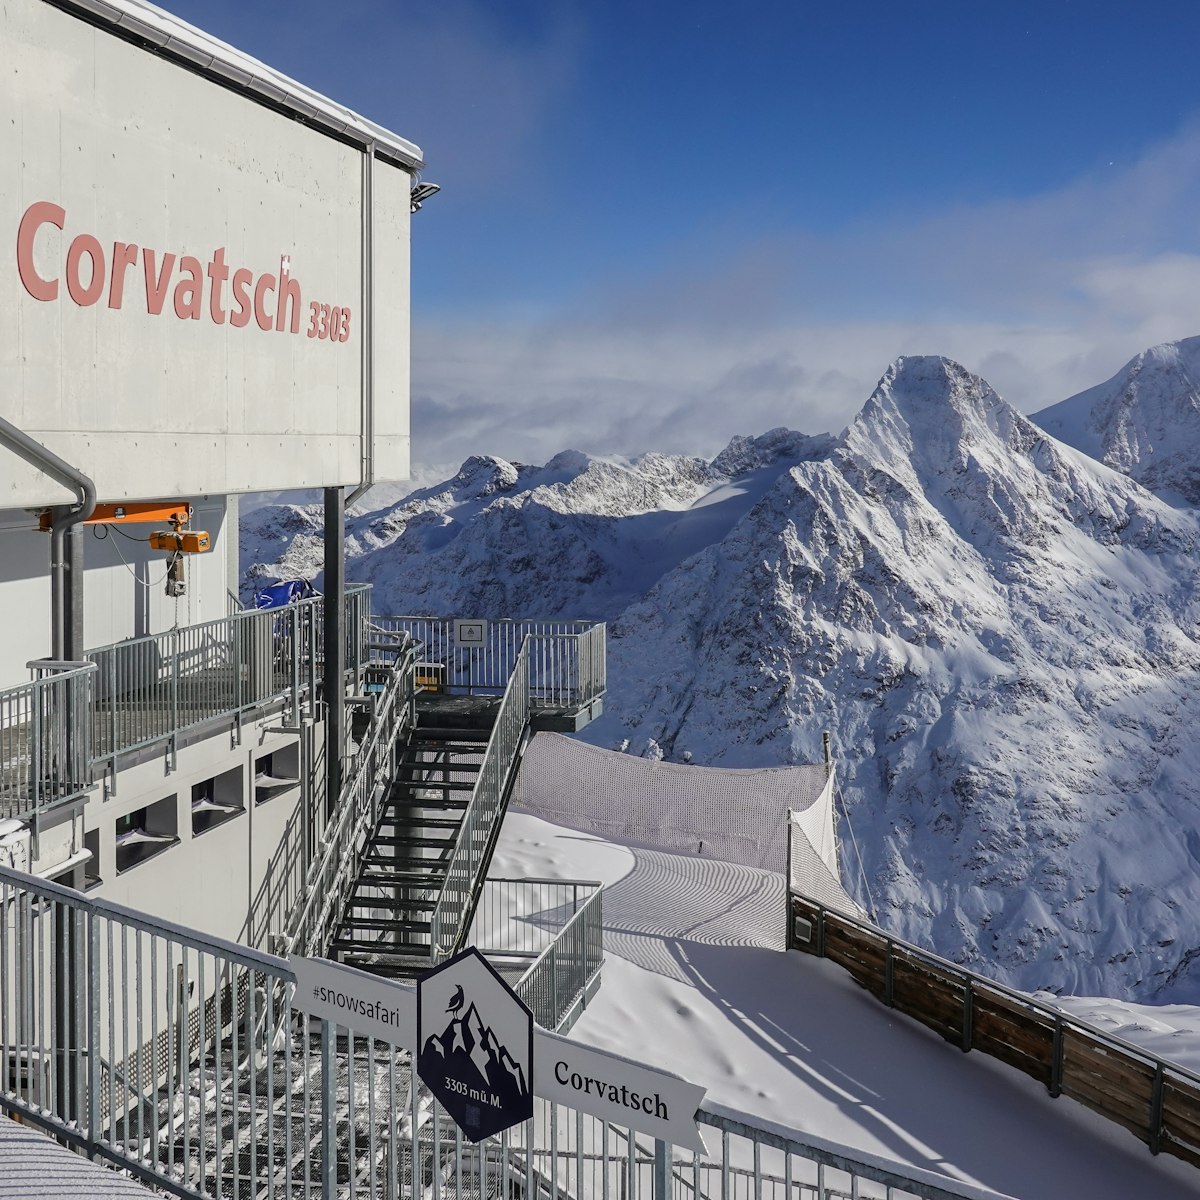 View of the Corvatsch cable car Bergstation that stands at 3303m in the Swiss alps in Canton Graubunden.